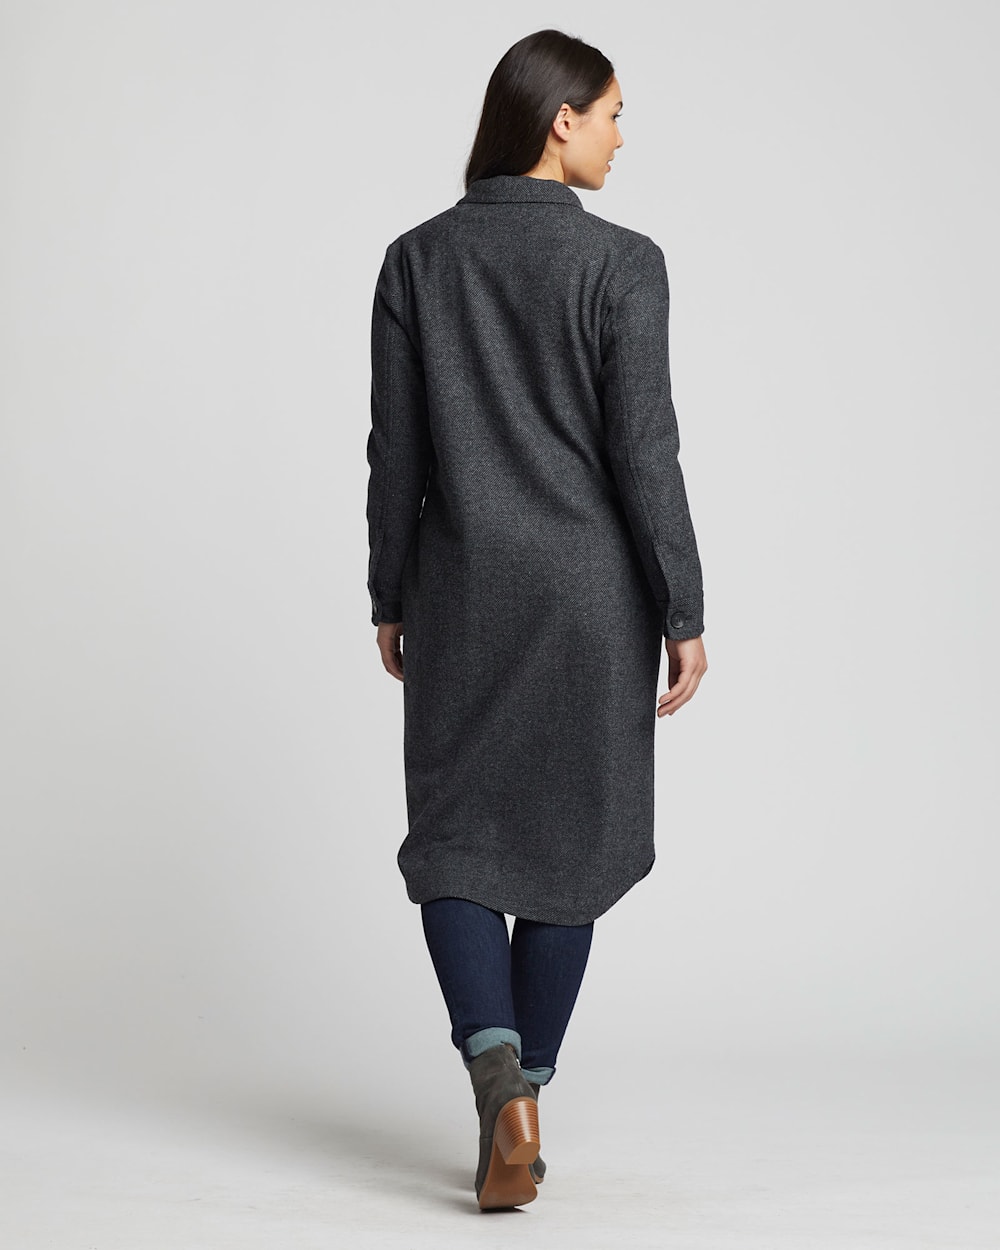 ALTERNATE VIEW OF WOMEN'S WOOL TWILL DUSTER SHIRT IN GREY MIX/BLACK image number 3